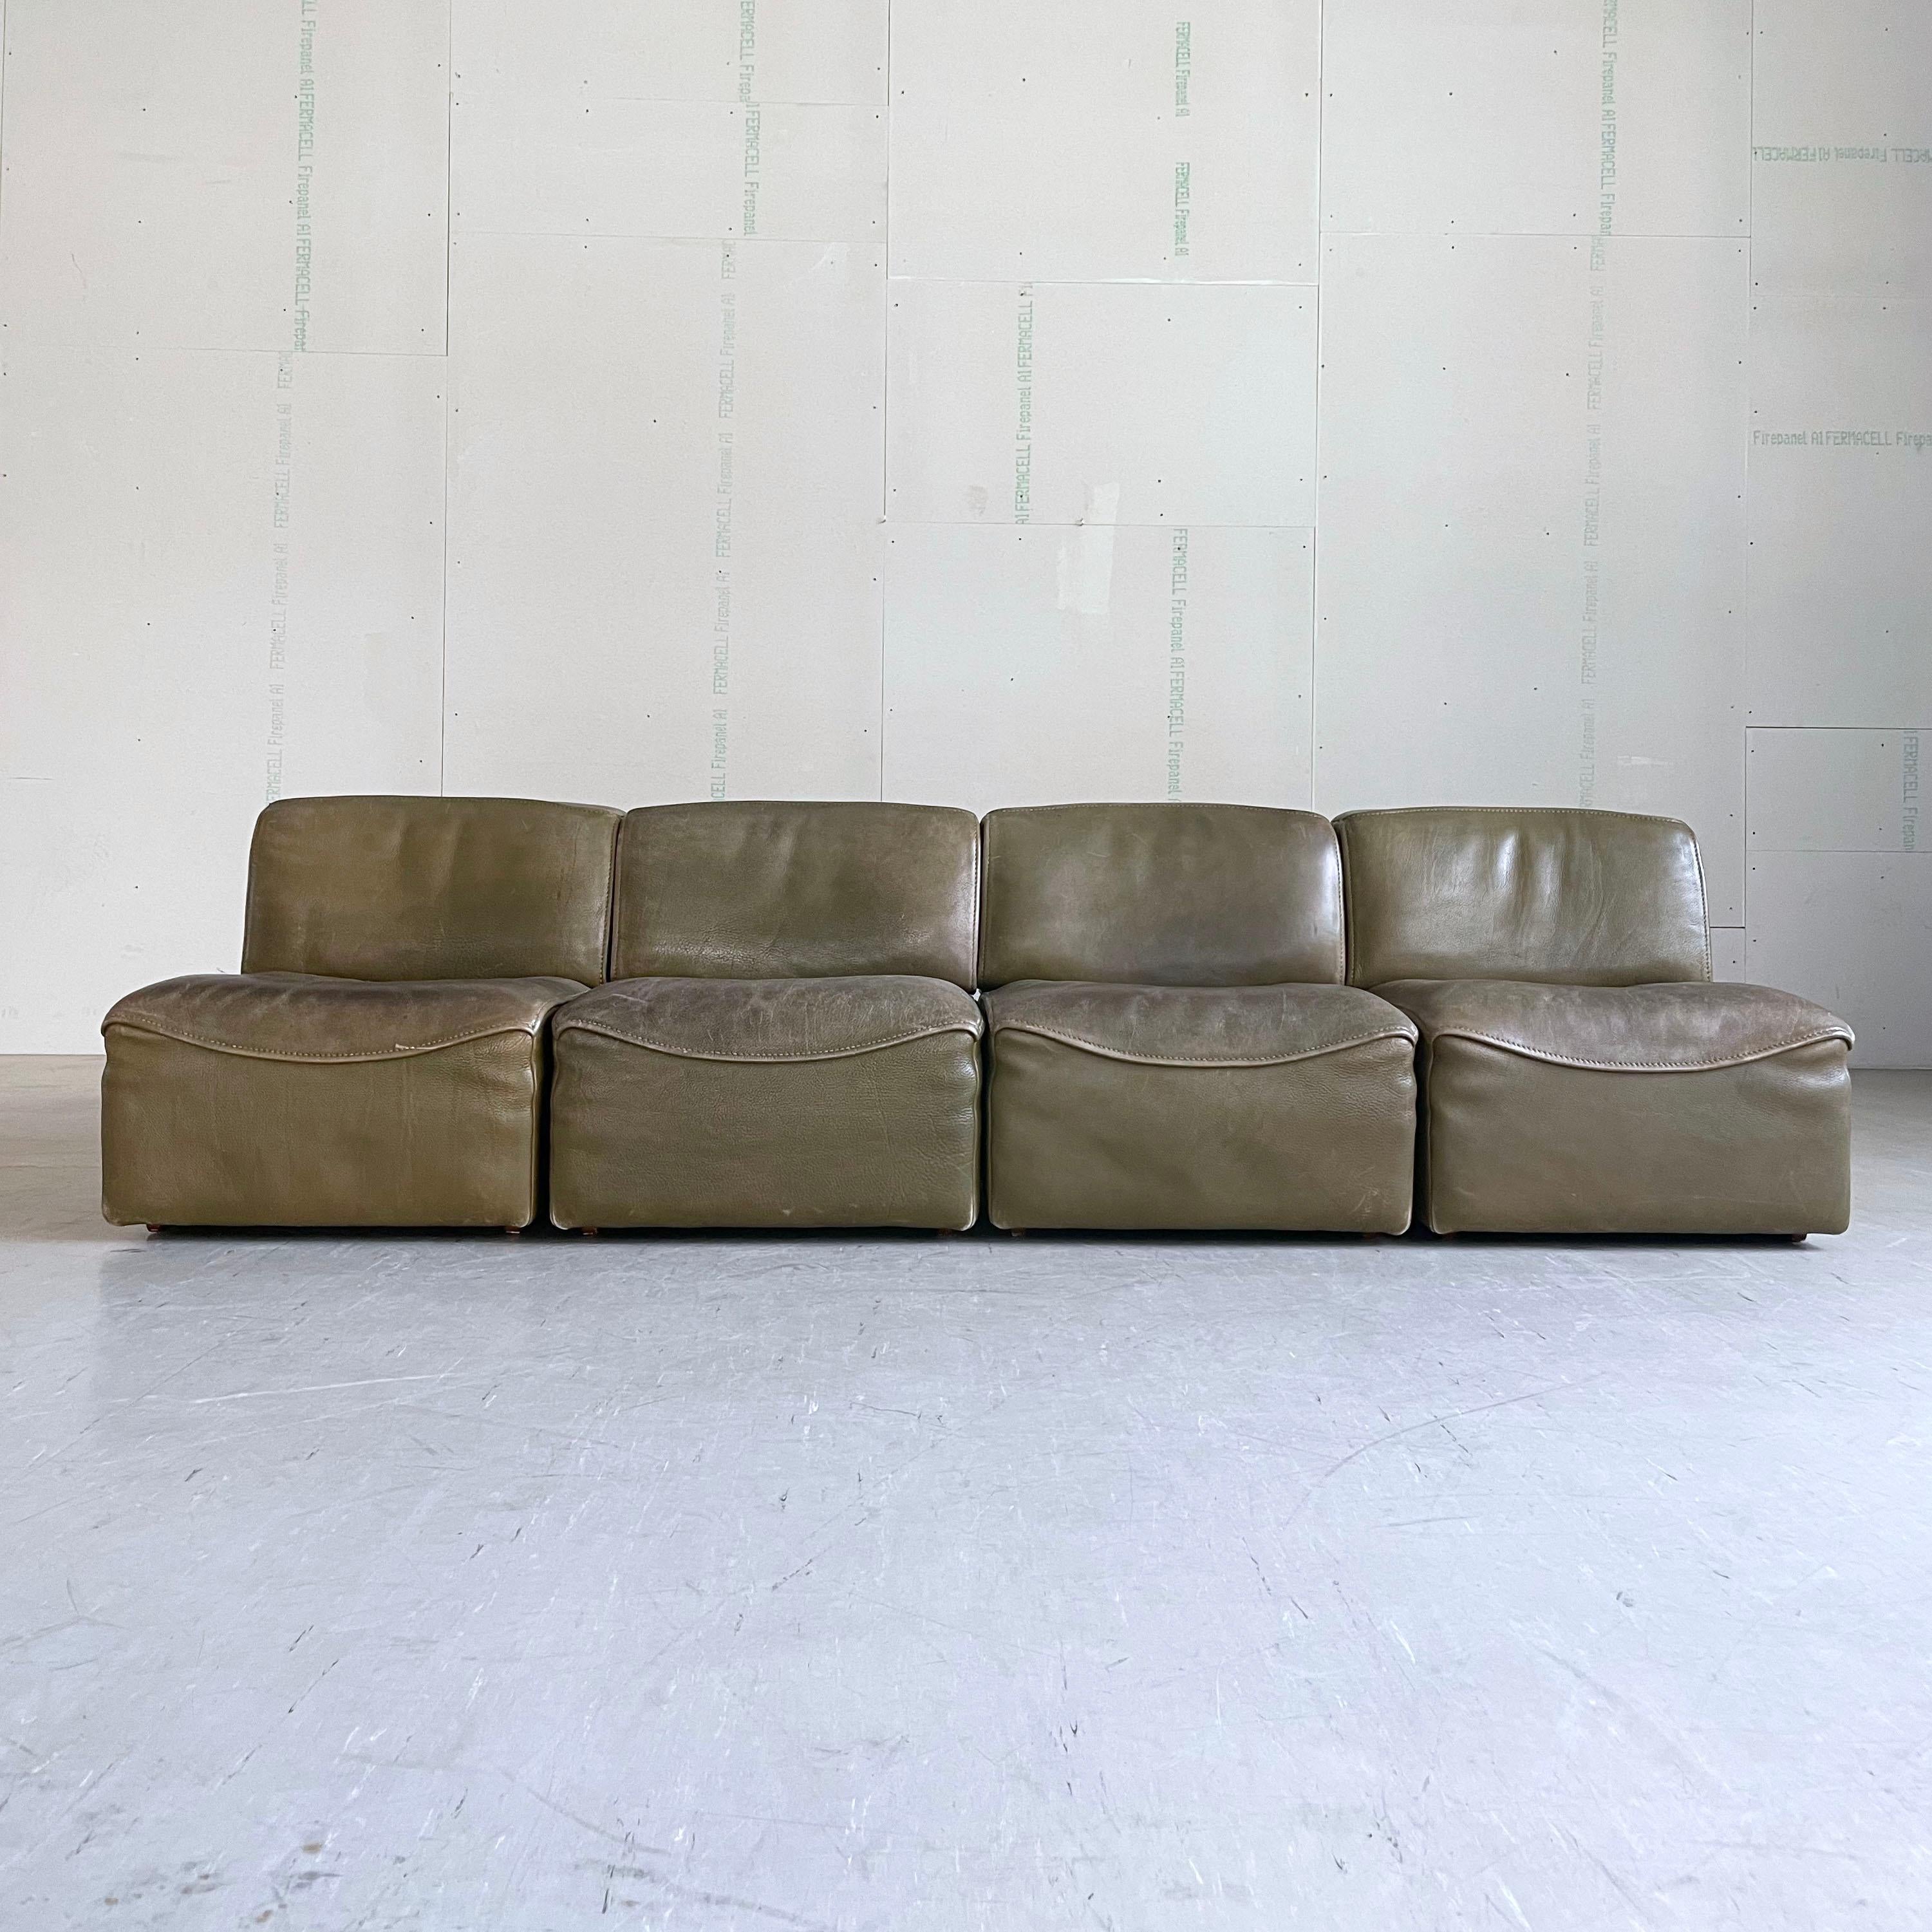 De Sede DS-15 Modular leather sofa, consisting of four identical elements in a rare olive green leather which can be arranges in any varied positions for greater flxibility.
Produced by DeSede, Switzerland in the late 1960’s - early